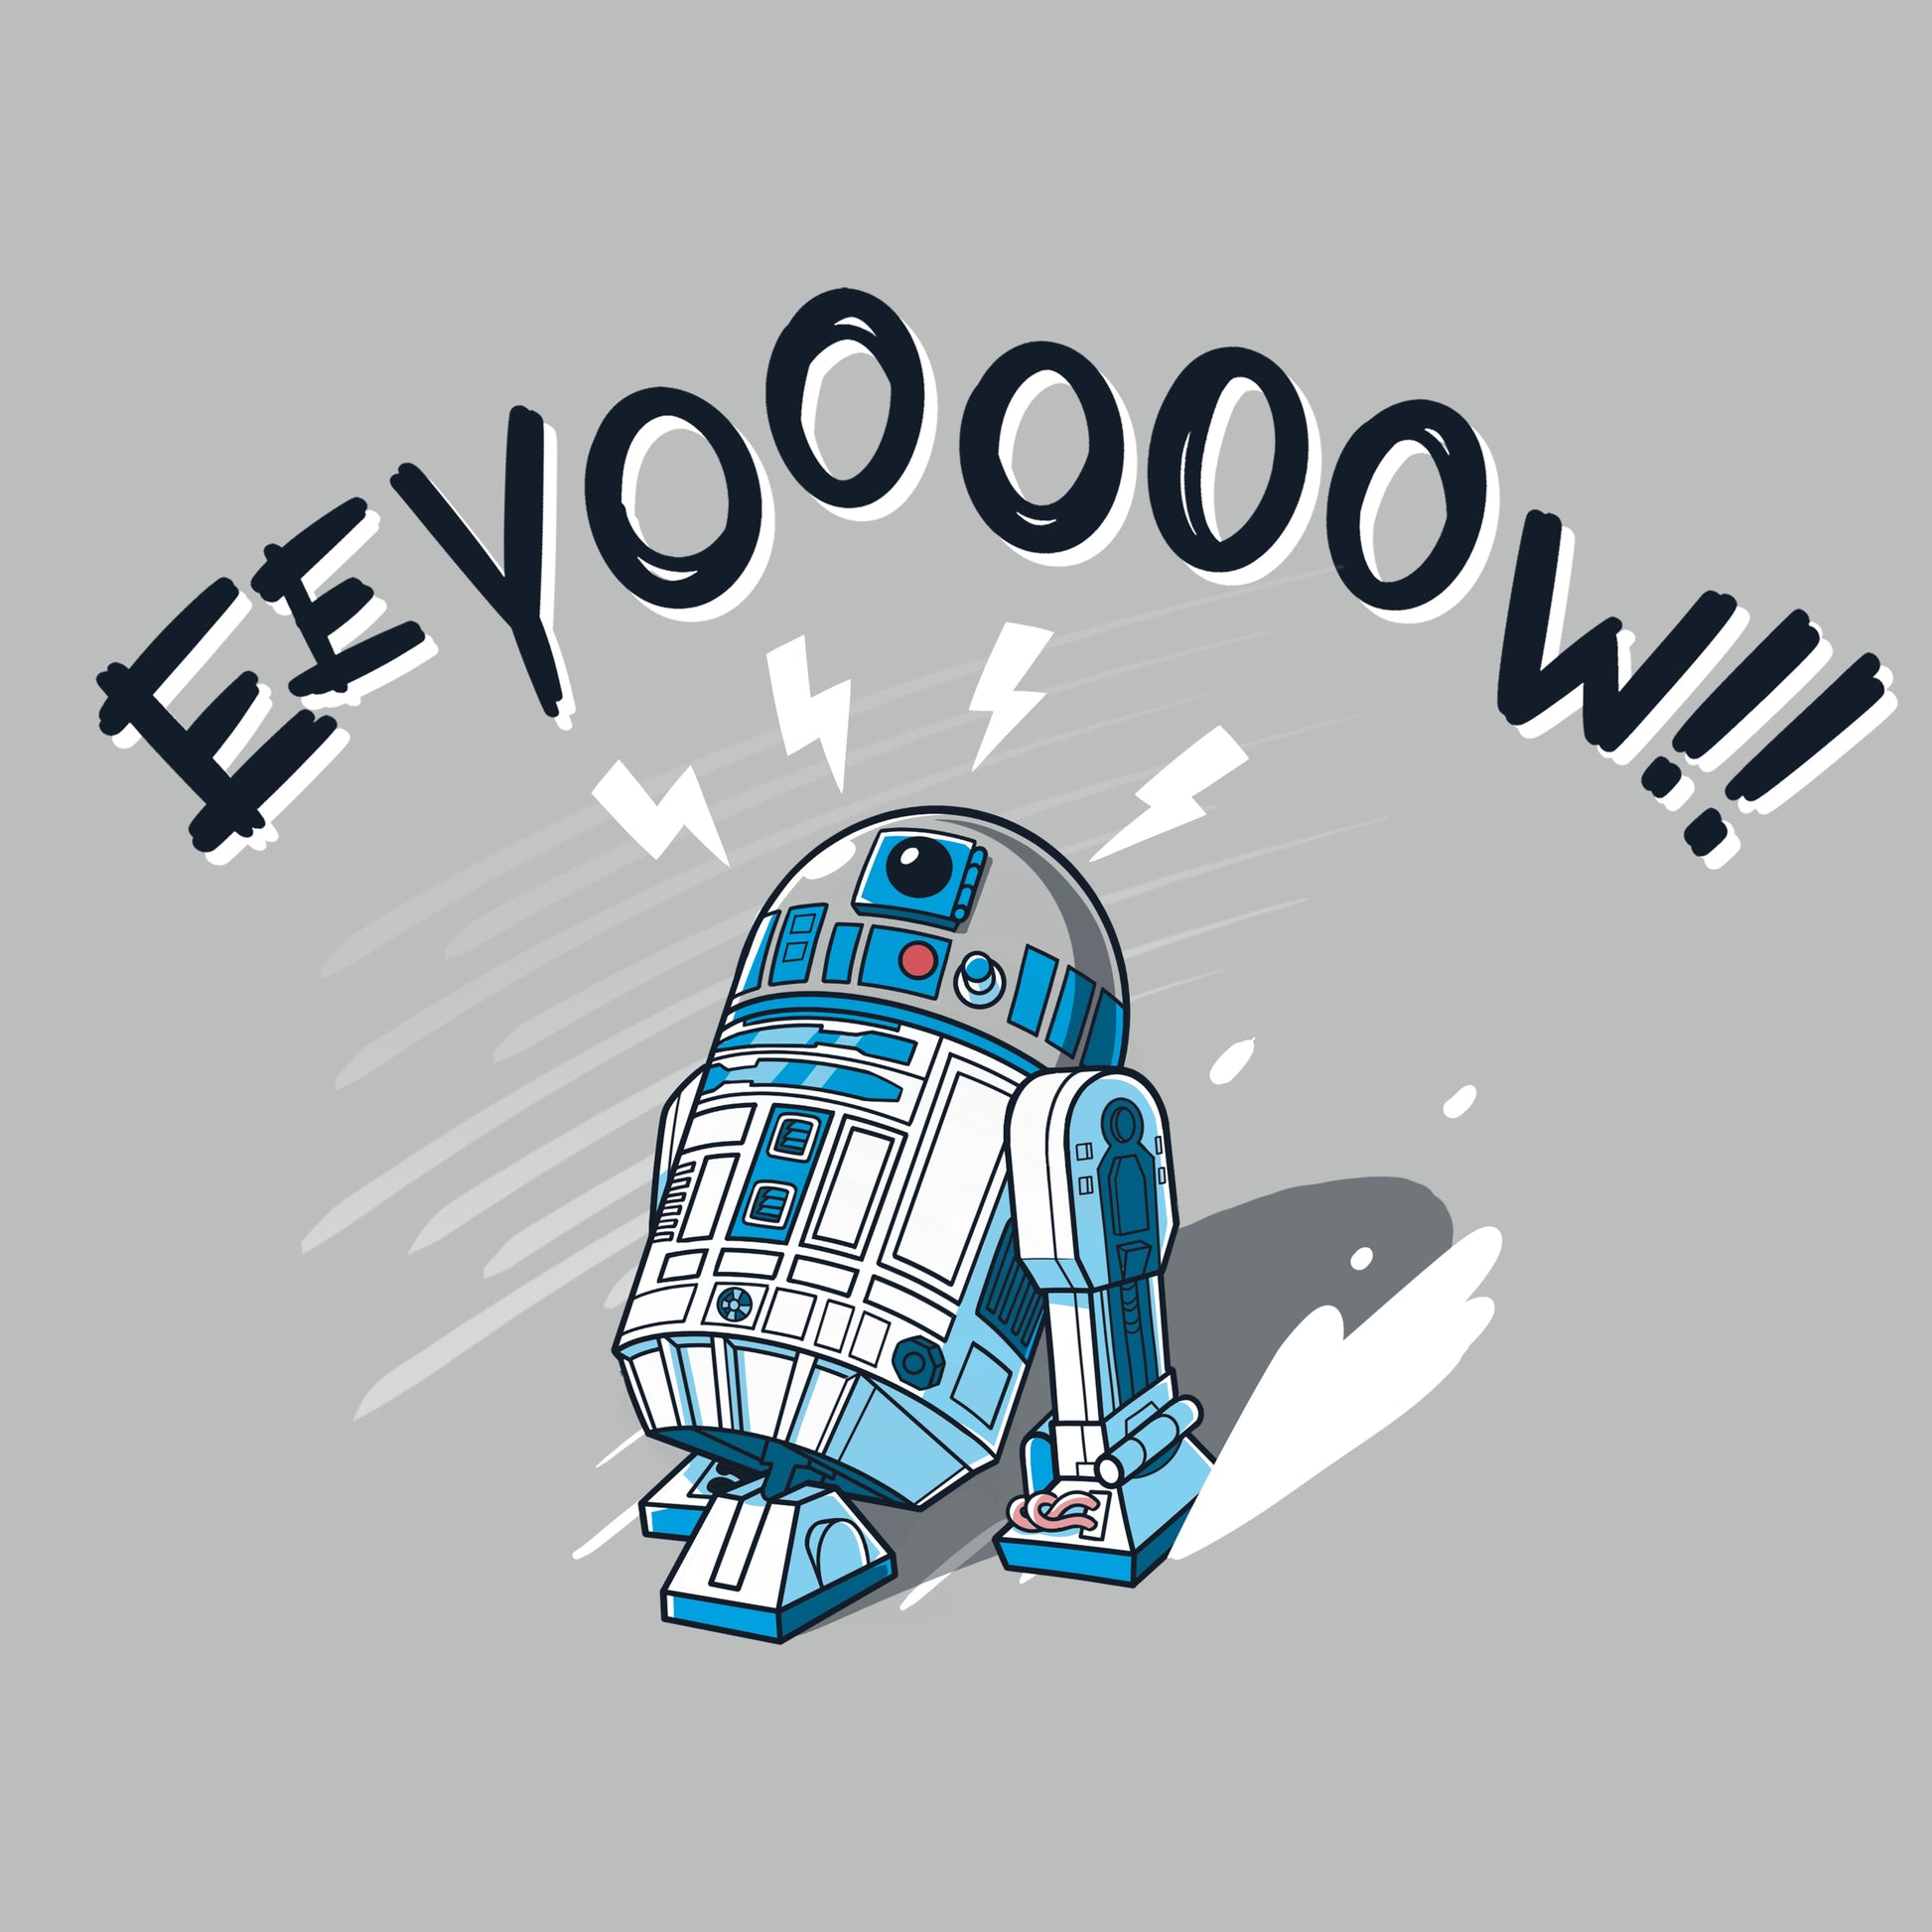 An officially licensed Eeyooooow! t-shirt from Star Wars.